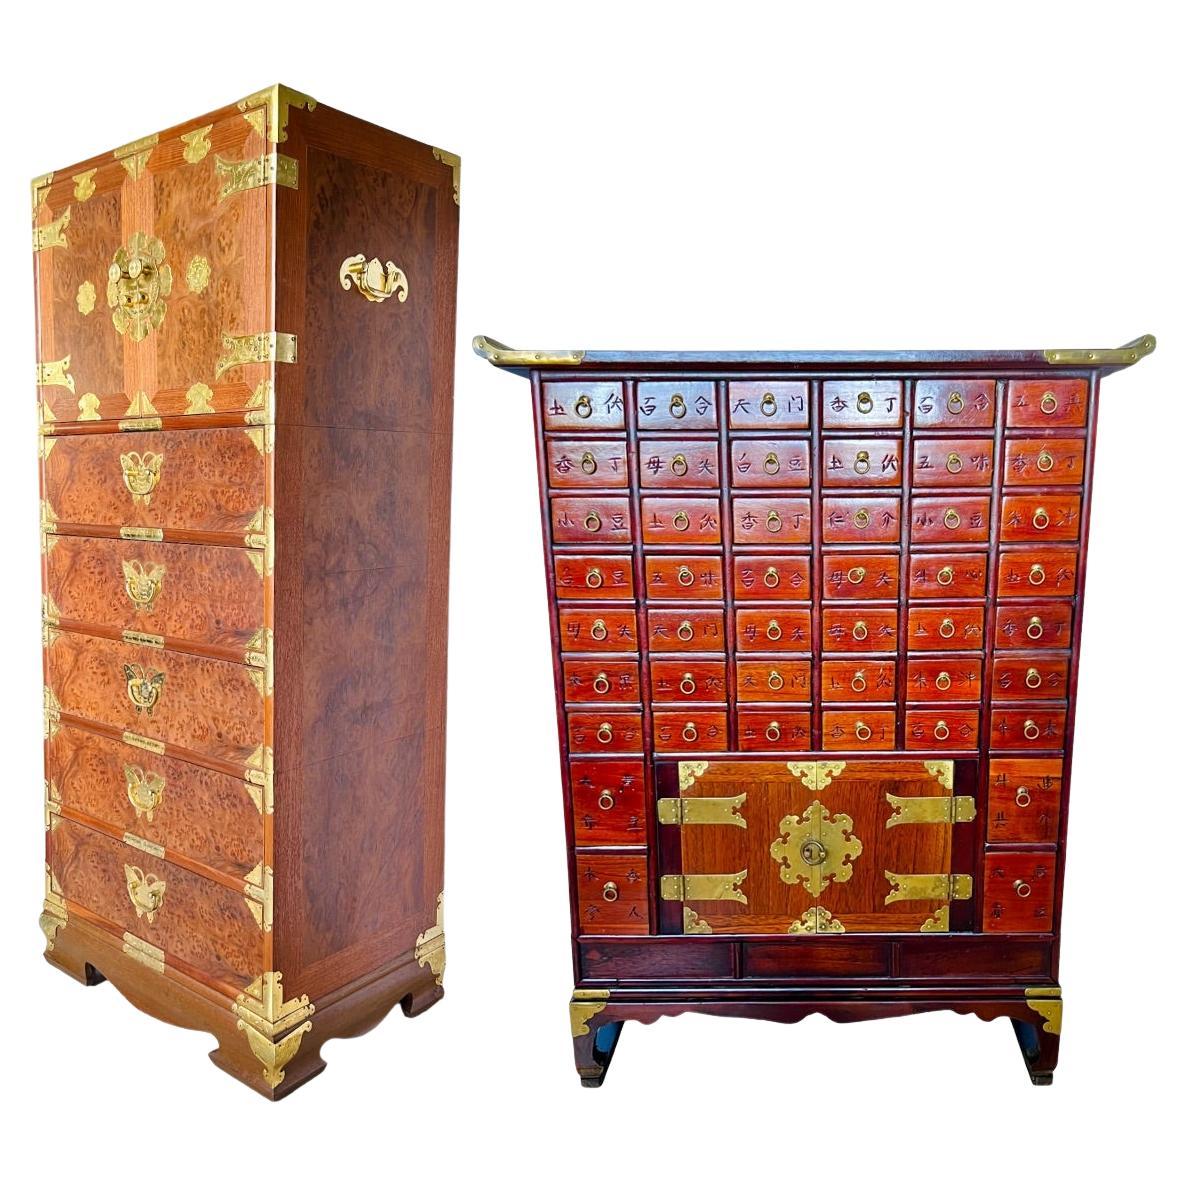 Chinese Lingerie Chest and Korean Apothecary Cabinet, a Set